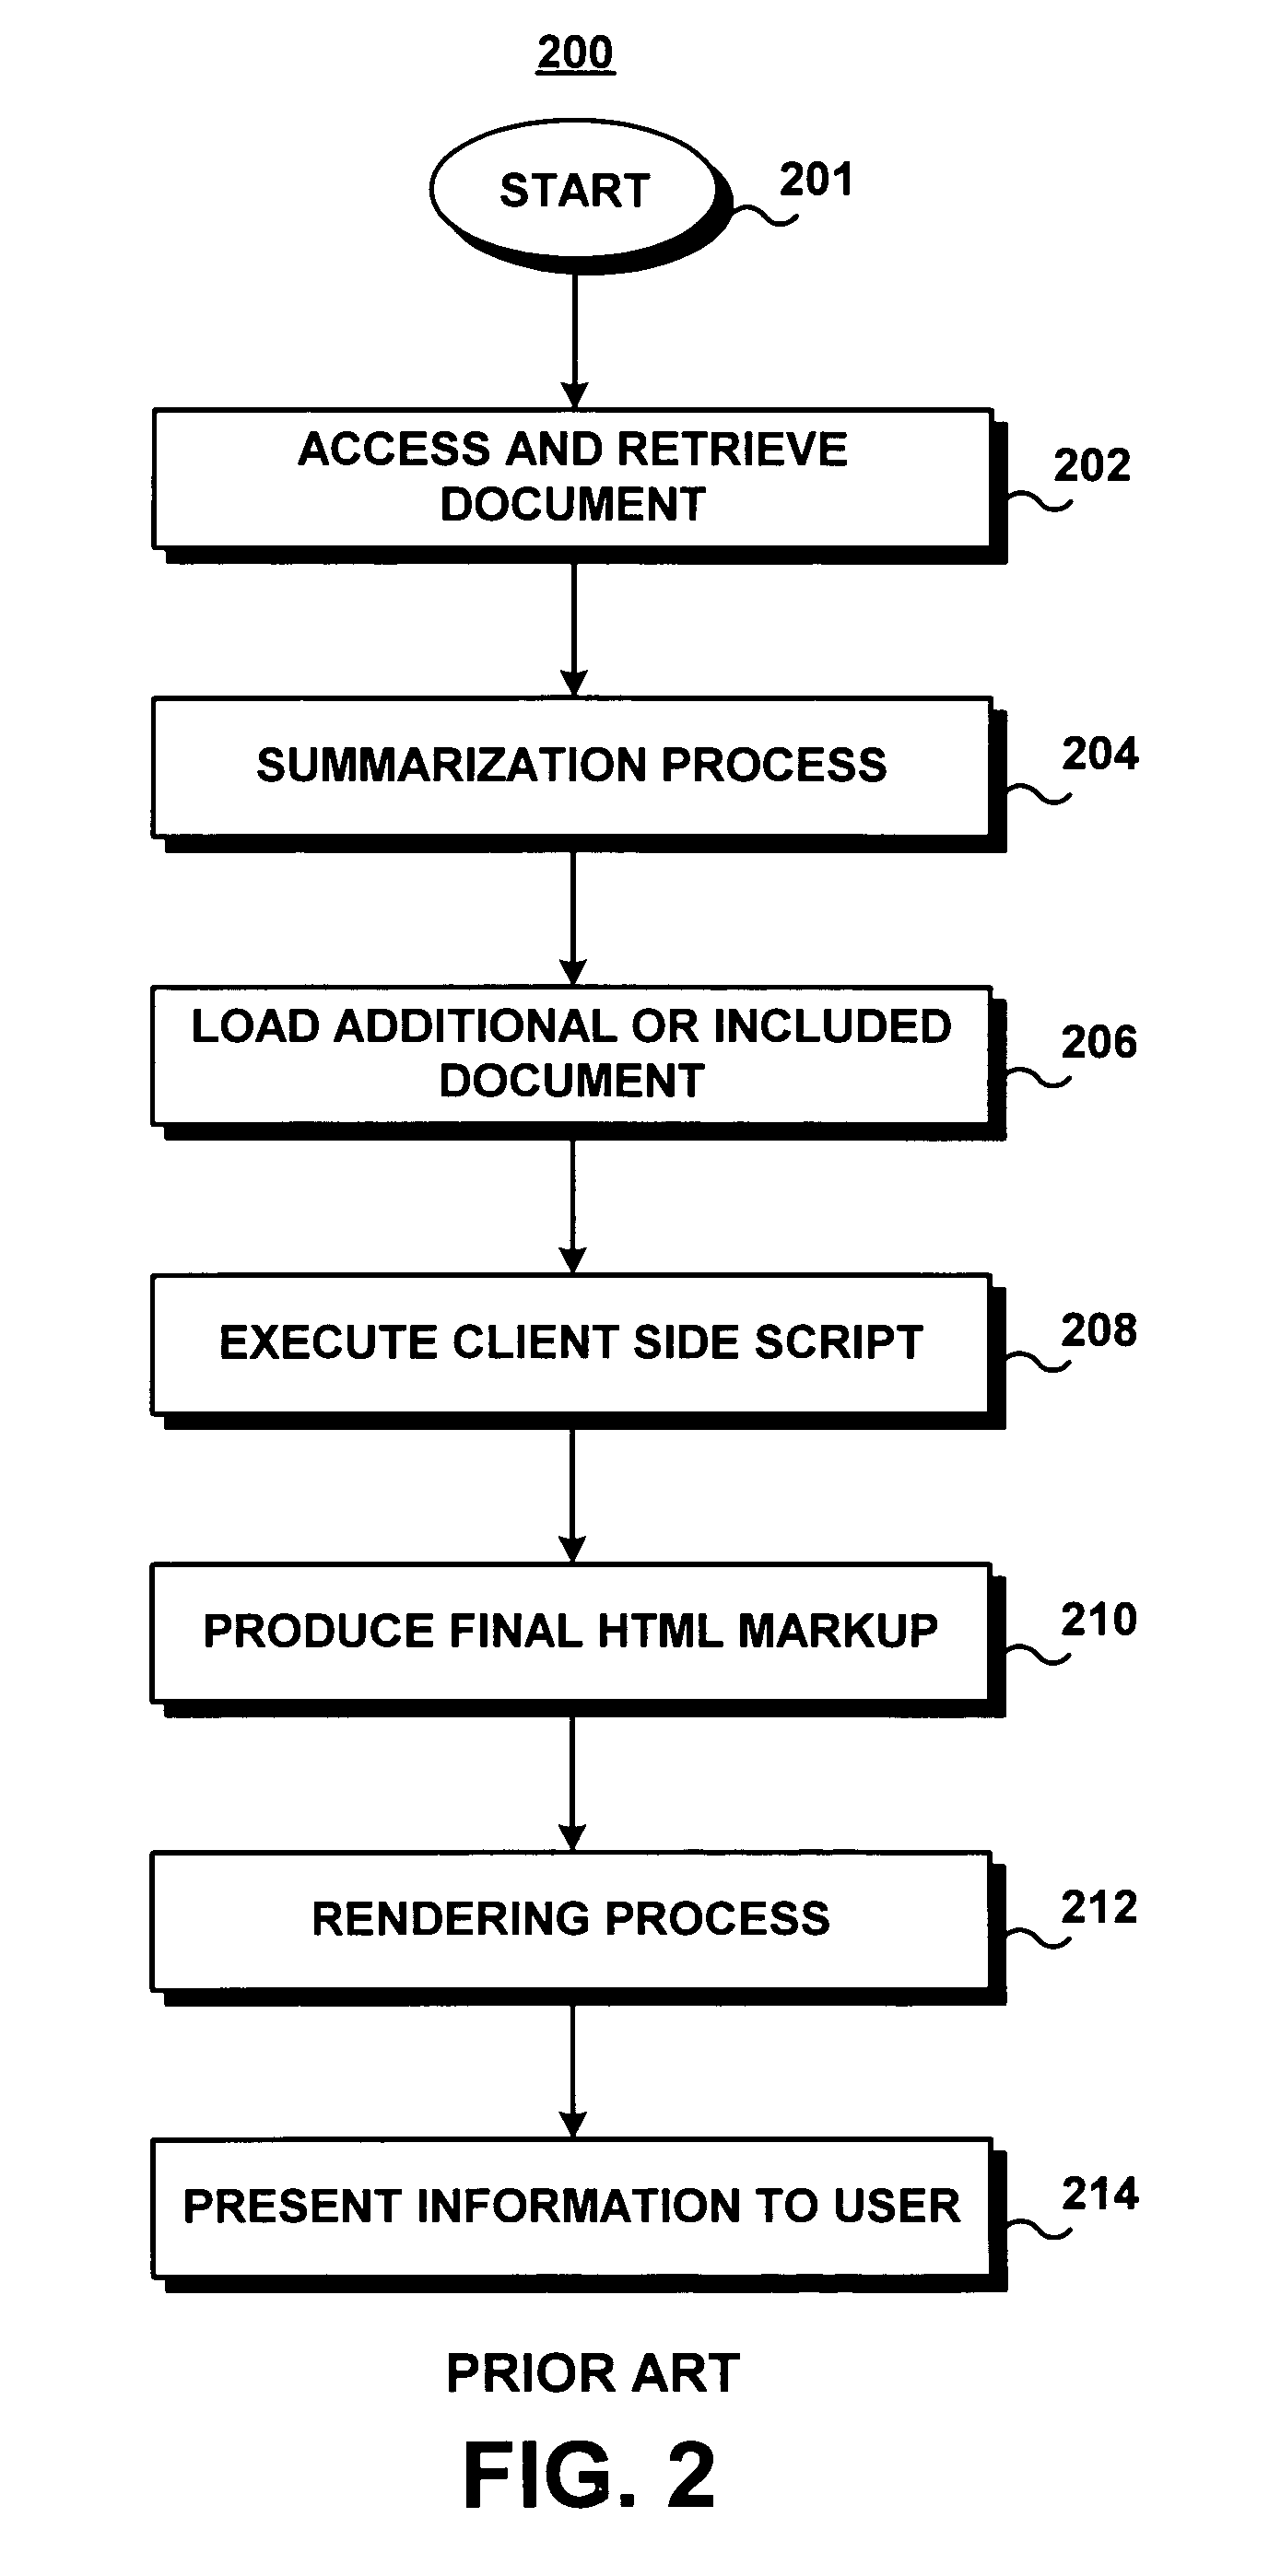 System and method for preventing automated crawler access to web-based data sources using a dynamic data transcoding scheme